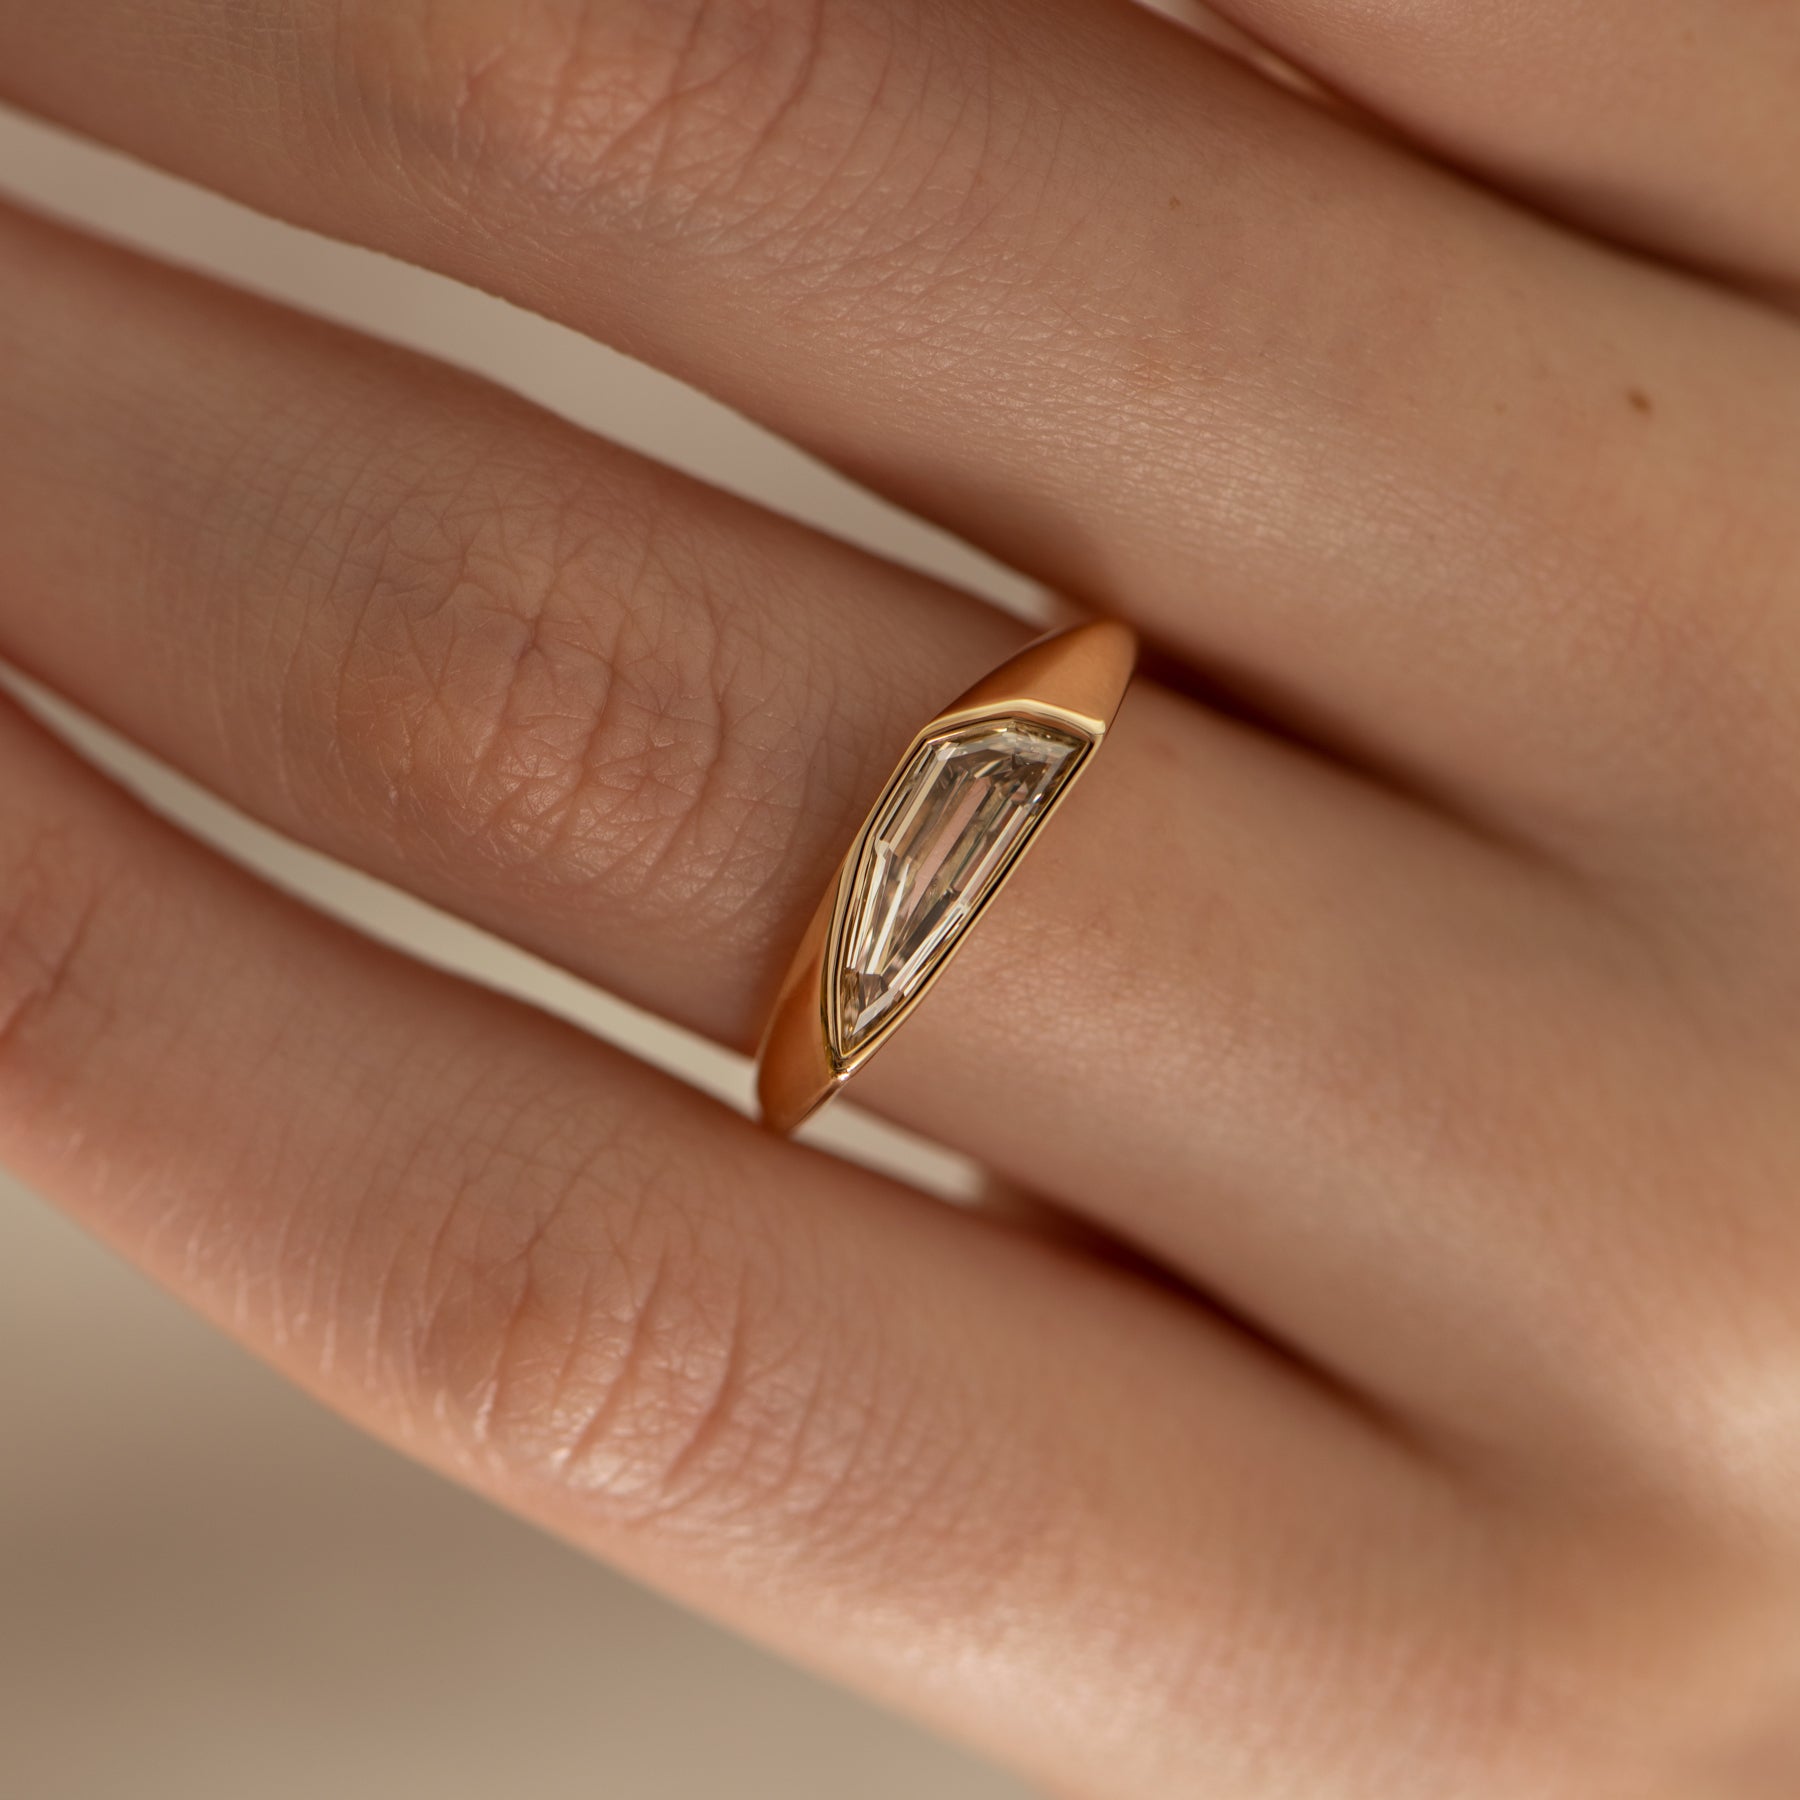 Sliced Diamond Solitaire Ring with a Minimal Golden Bezel OOAK solid gold